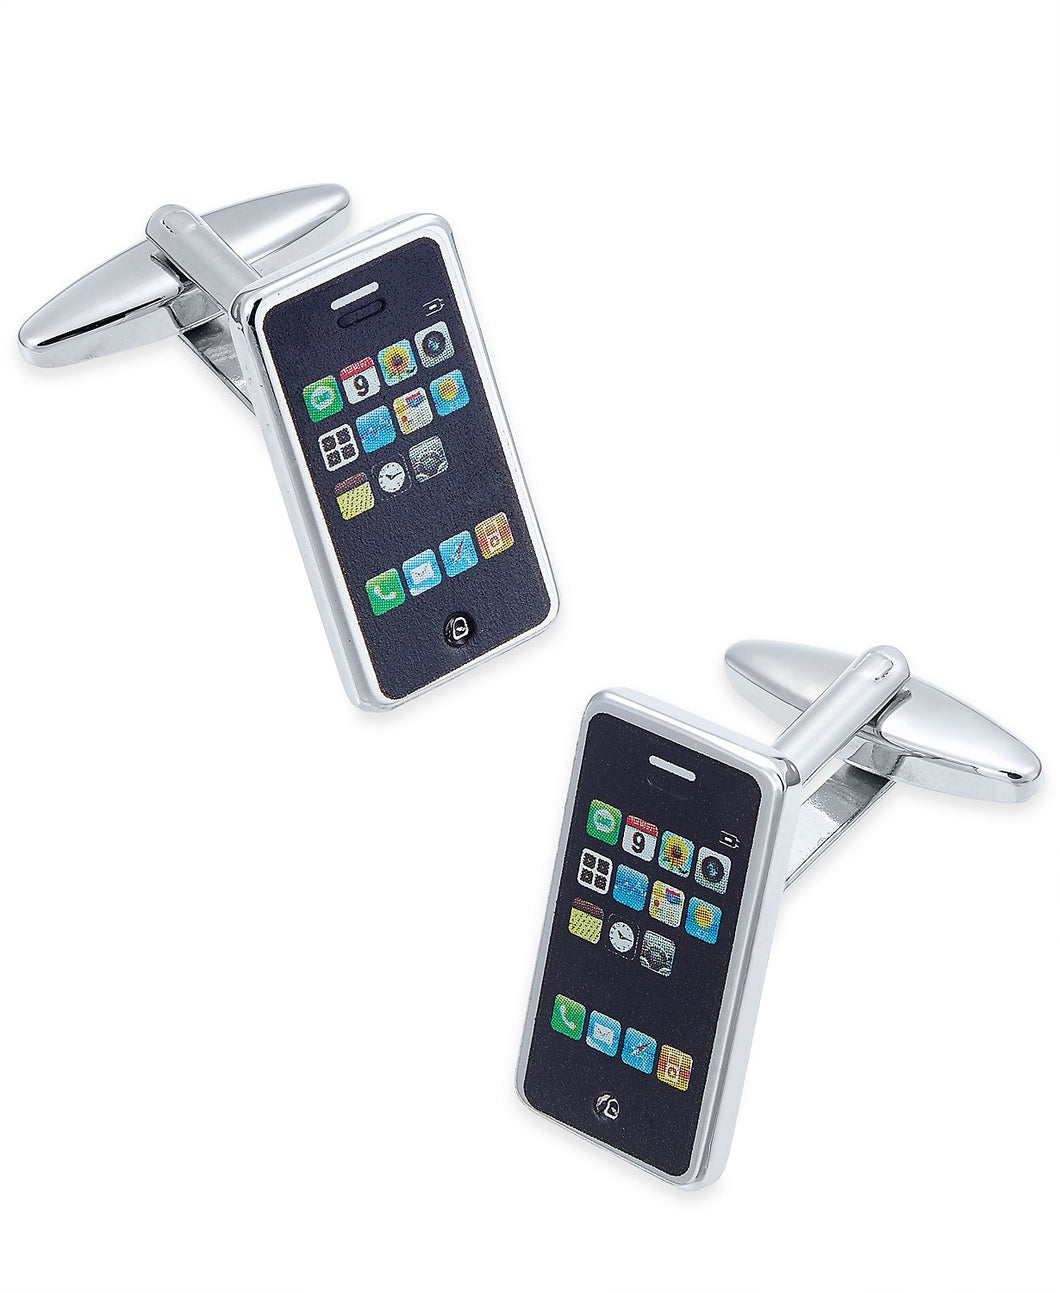 Sutton by Men's Stainless Steel Smart Phone Cuff Links